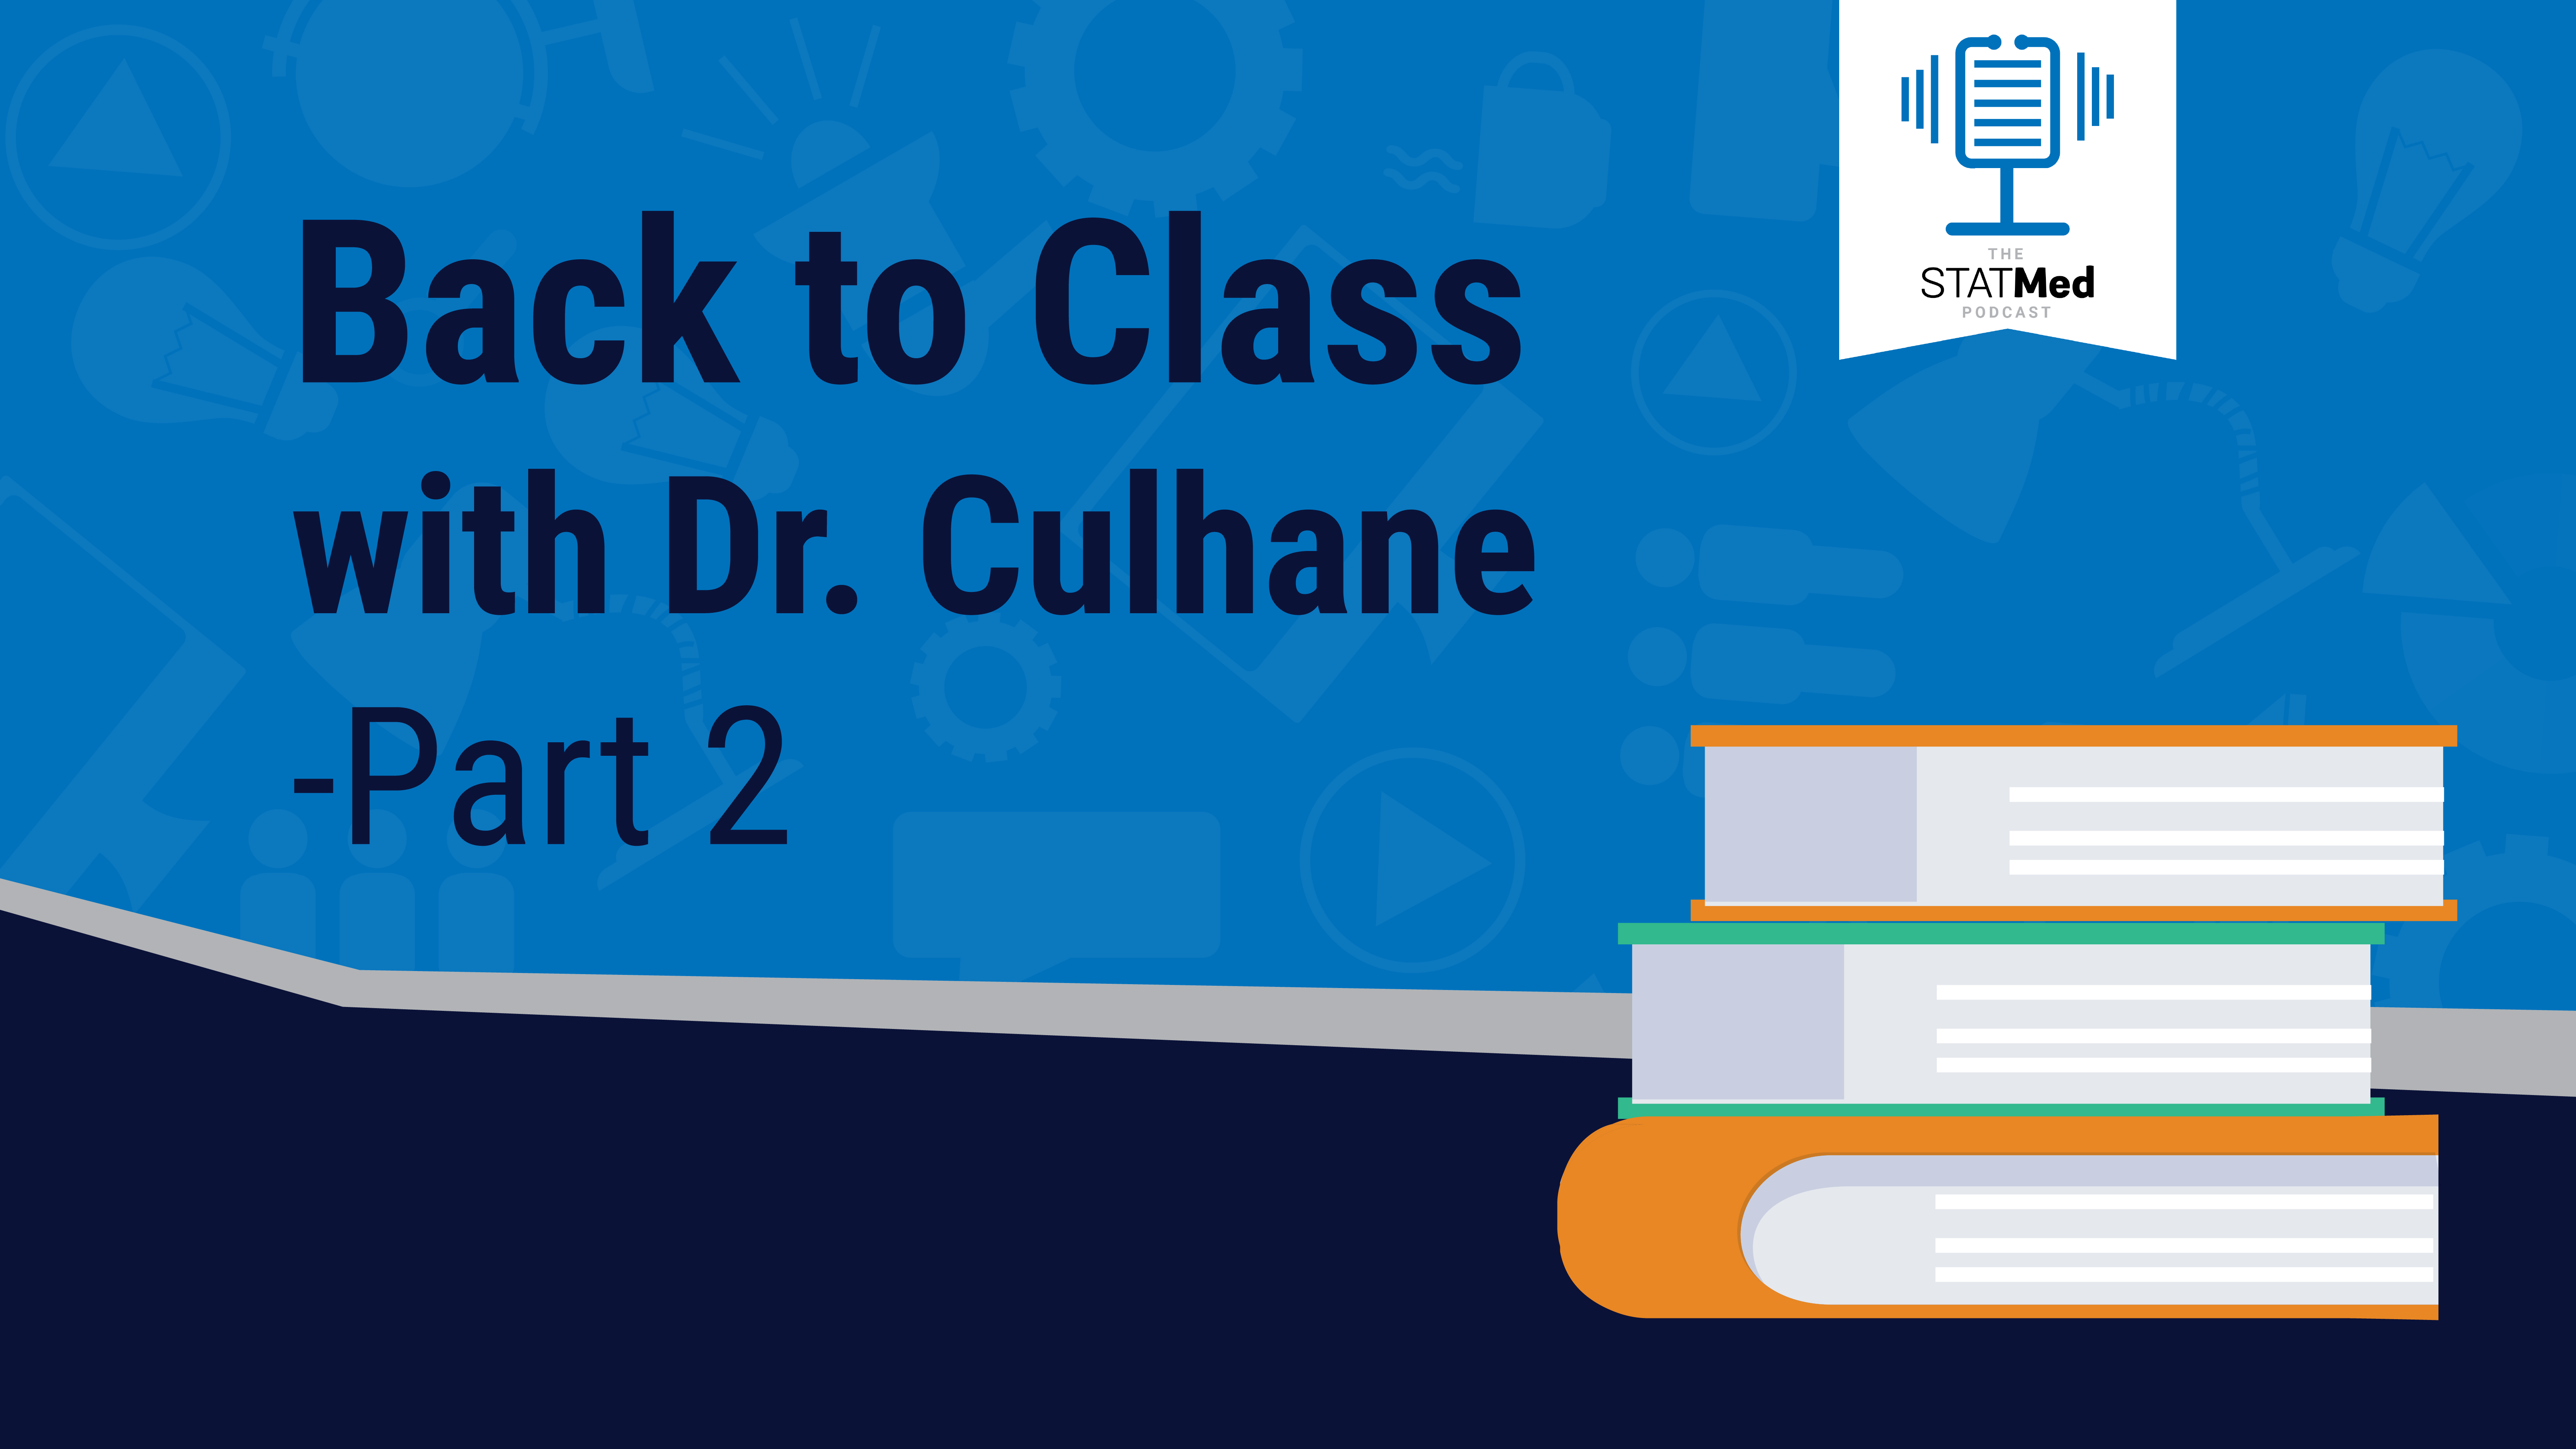 Featured image for “On The STATMed Podcast: Back to Class with Dr. Culhane Part 2”